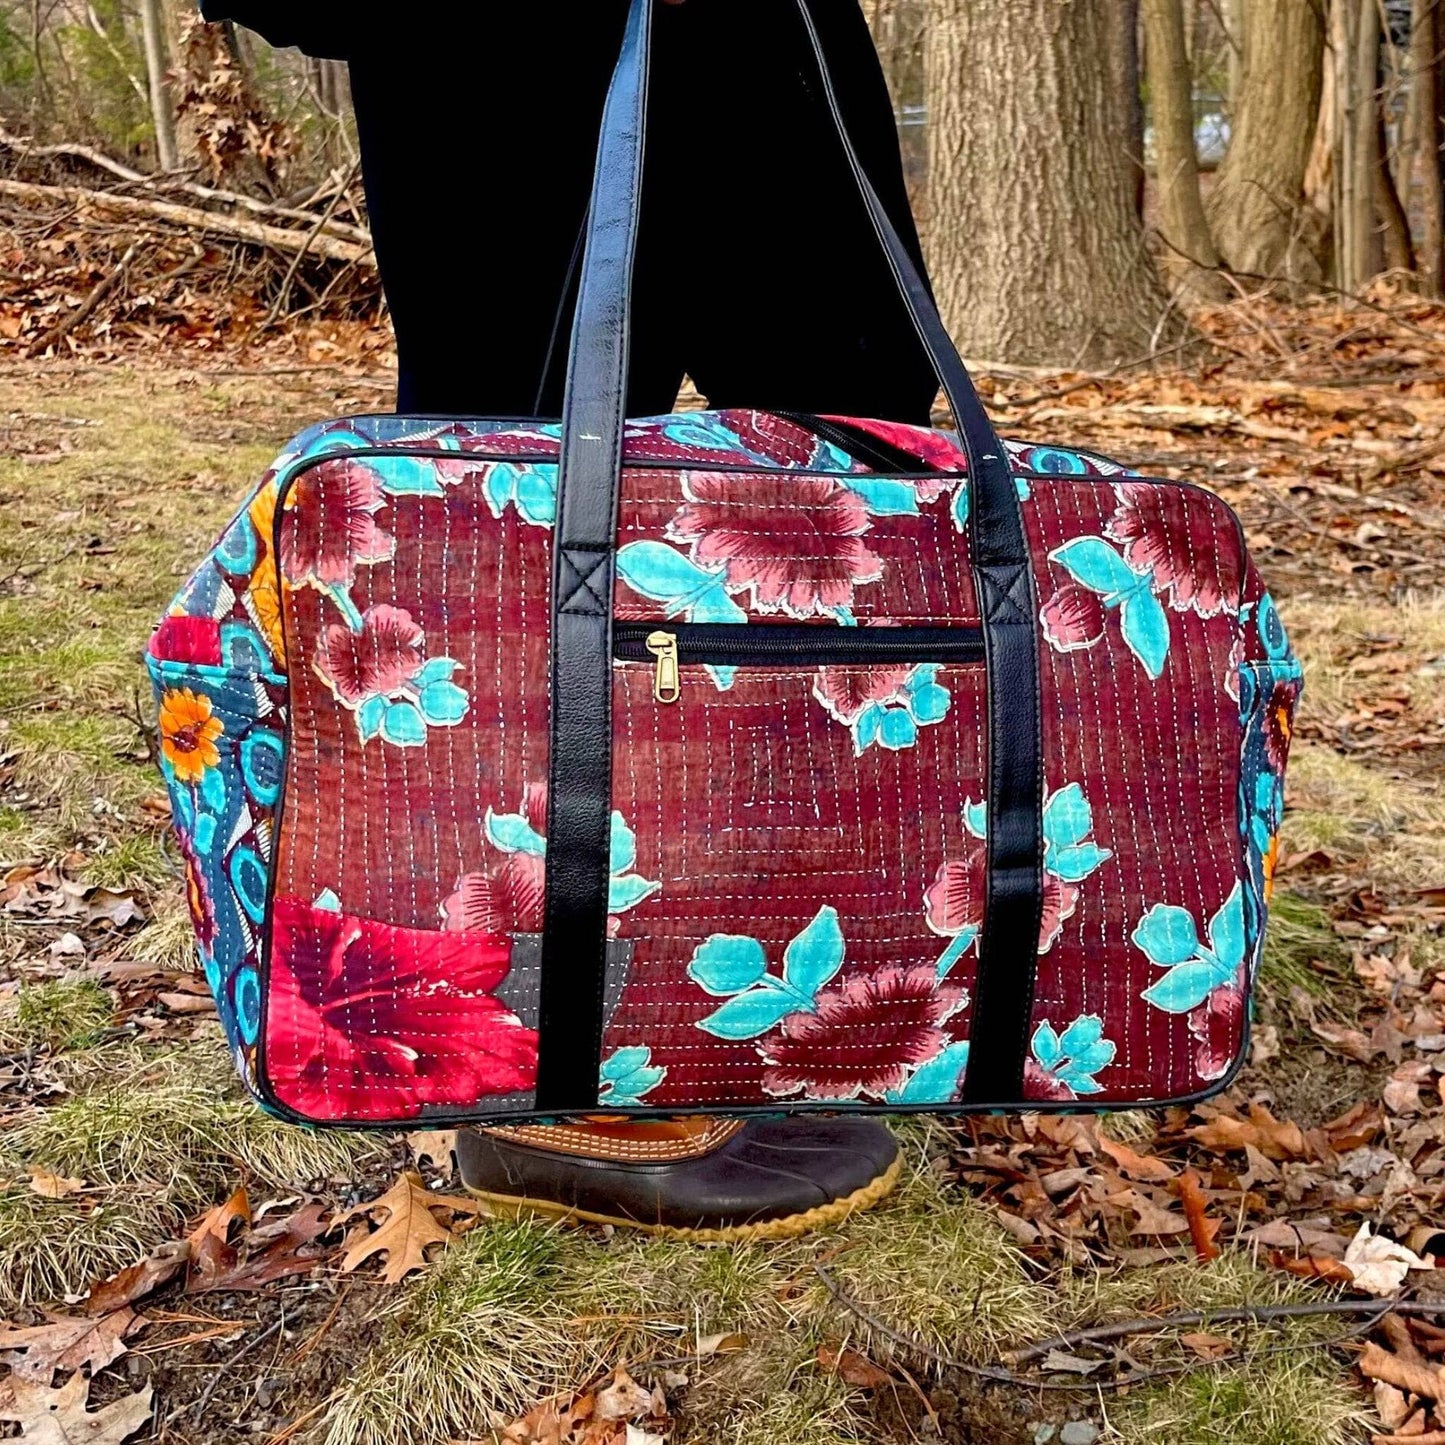 A model holding a purple Kantha Duffle Bag with Light Blue and Lavender Flower Patterns on it.